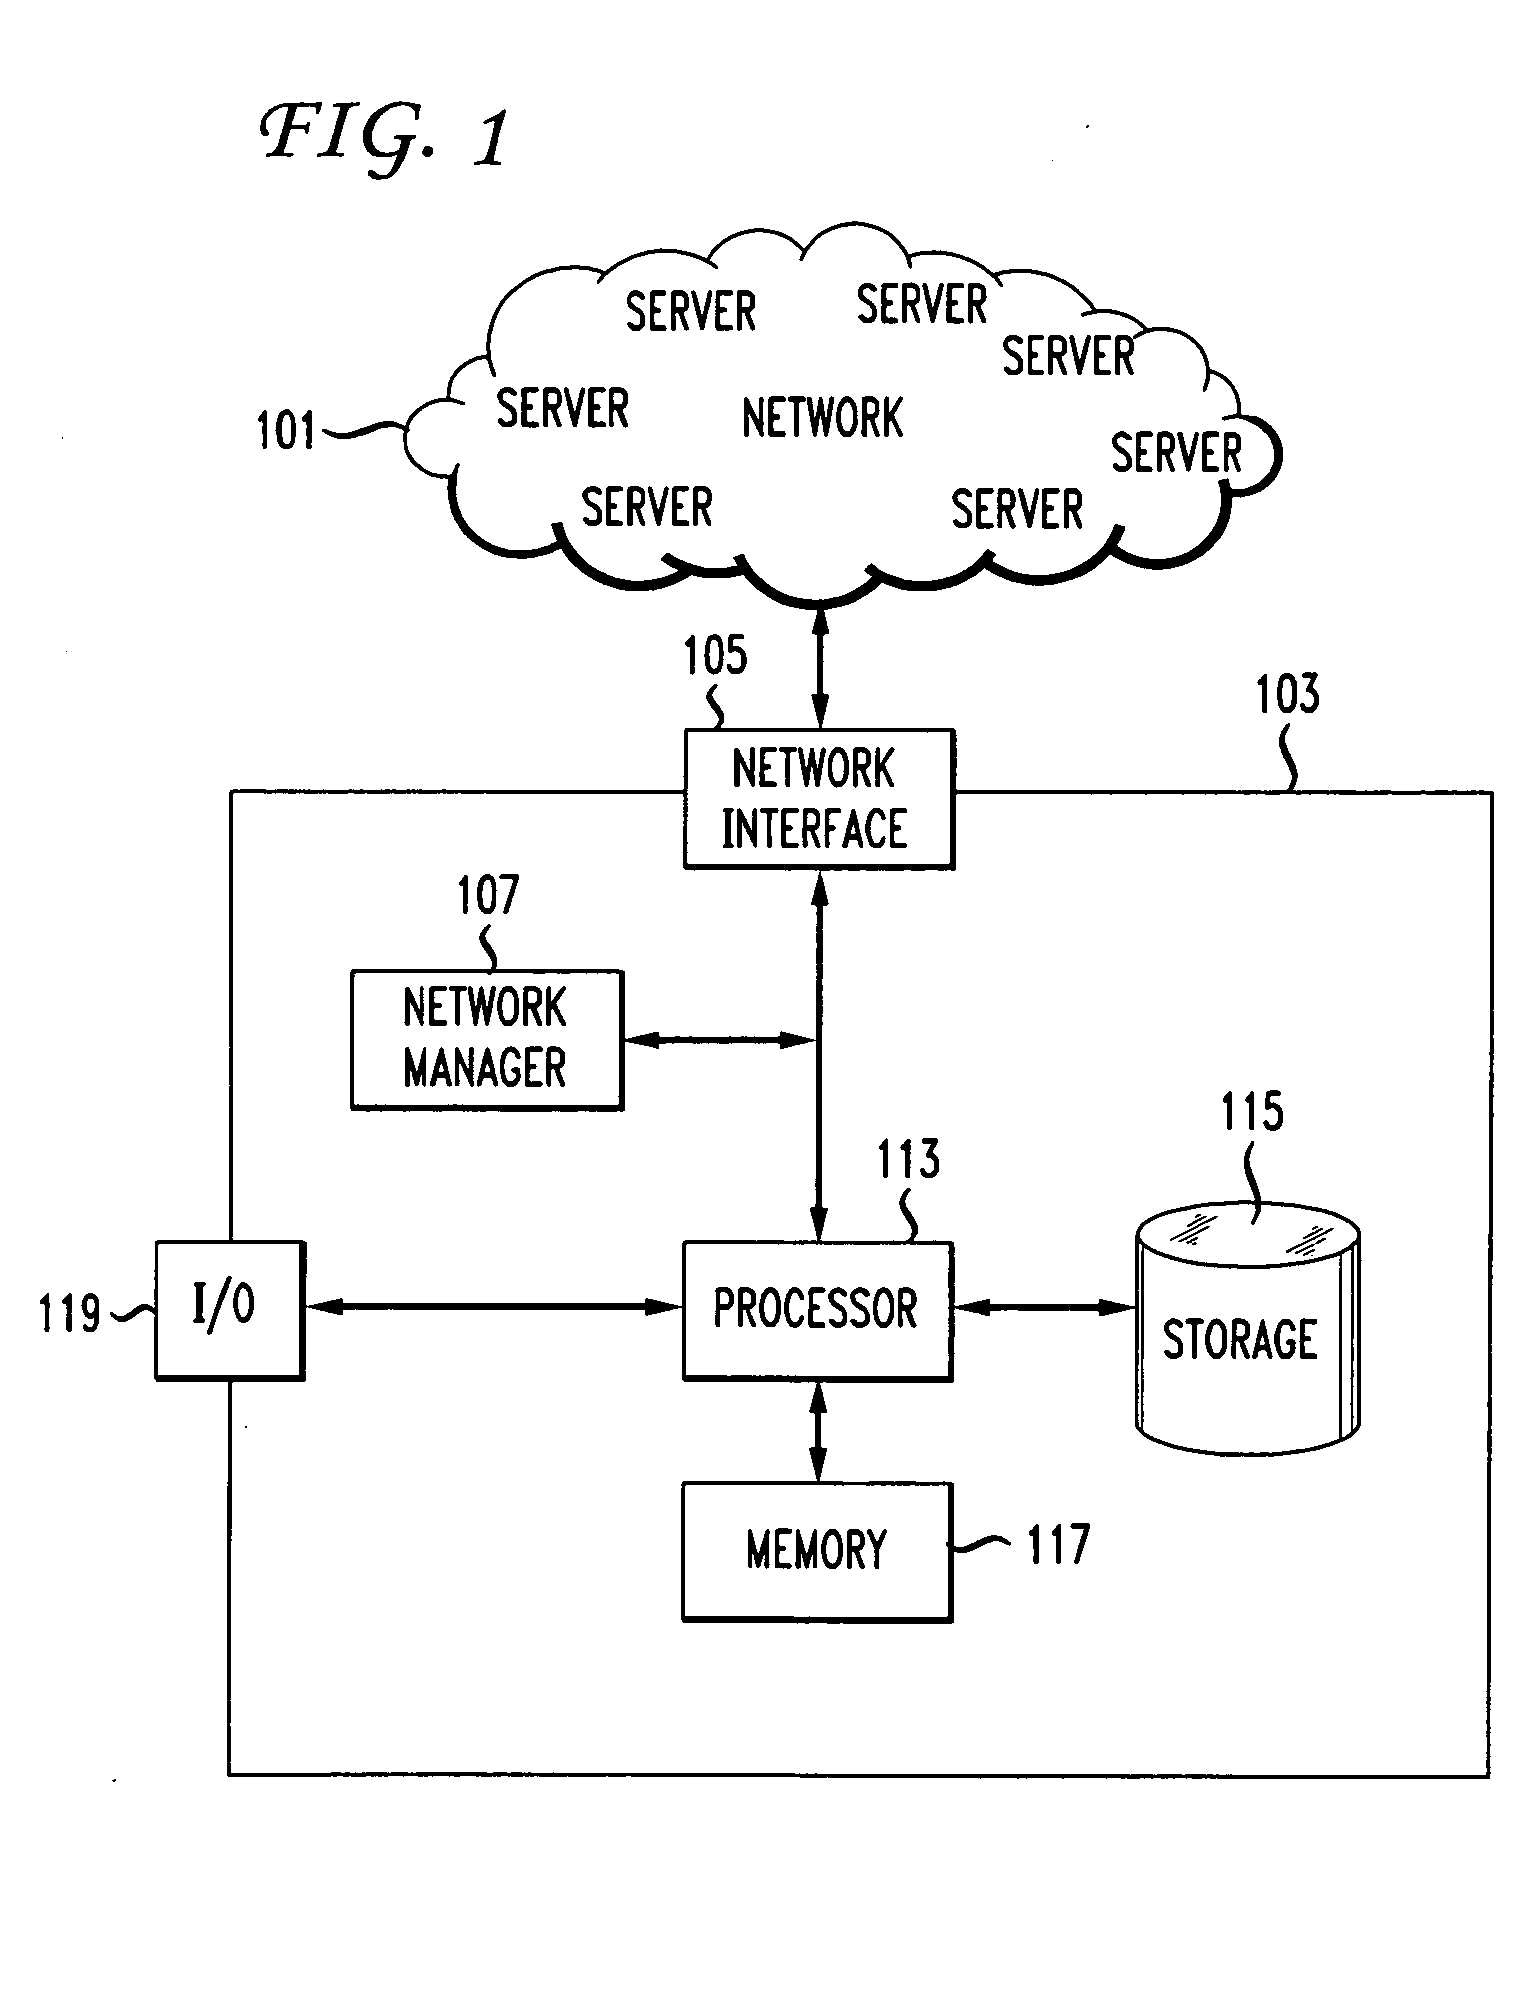 System and method for mining and tracking business documents